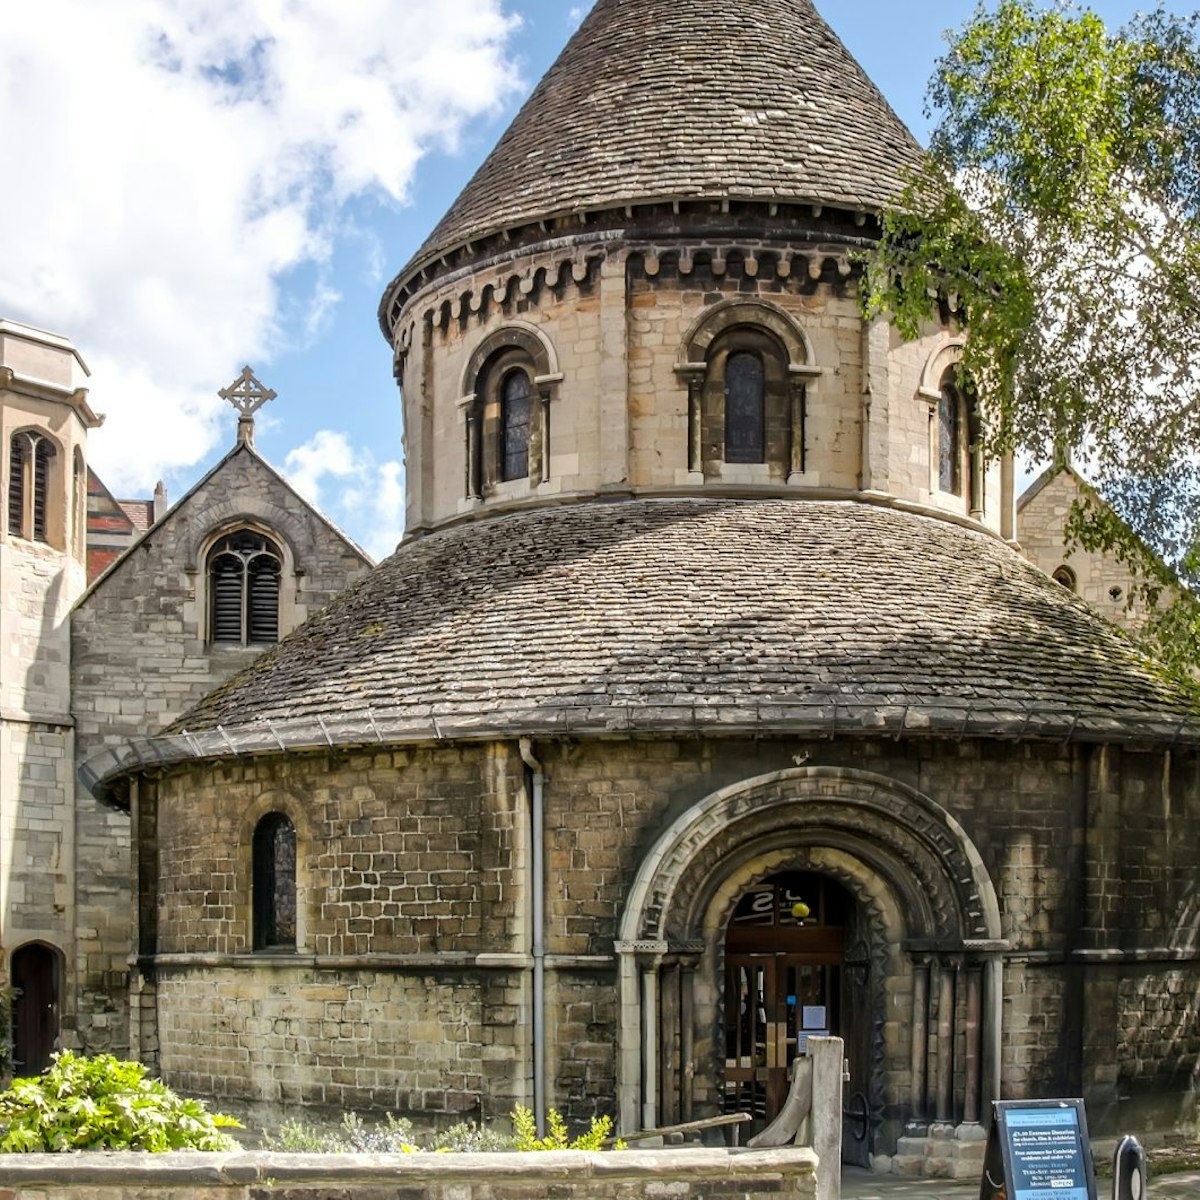 Cambridge, United Kingdom - May 12, 2012: Holy Sepulchre Round Church in Cambridge as seen on 12th of May, 2012.